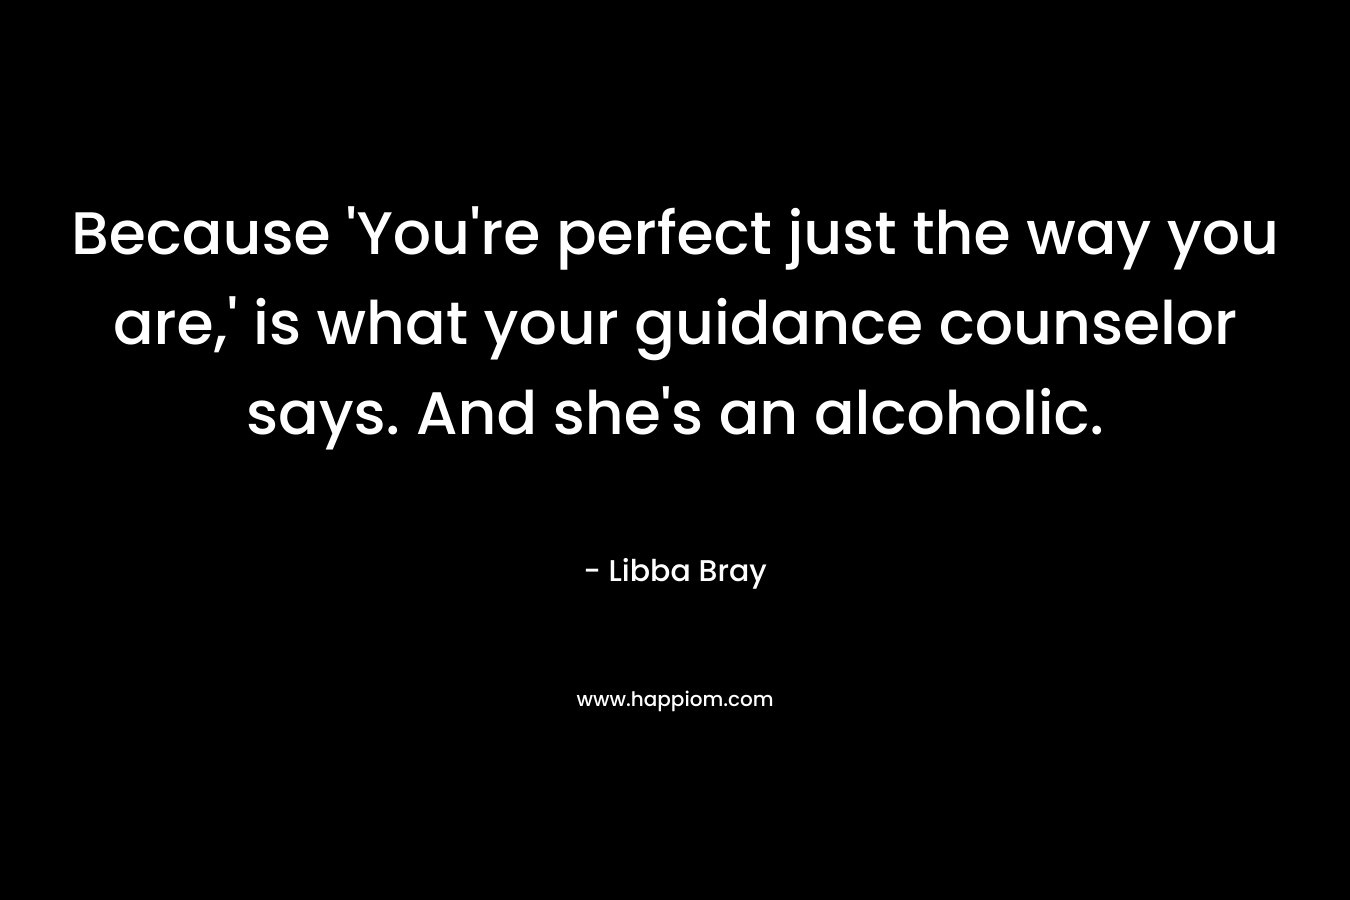 Because 'You're perfect just the way you are,' is what your guidance counselor says. And she's an alcoholic.